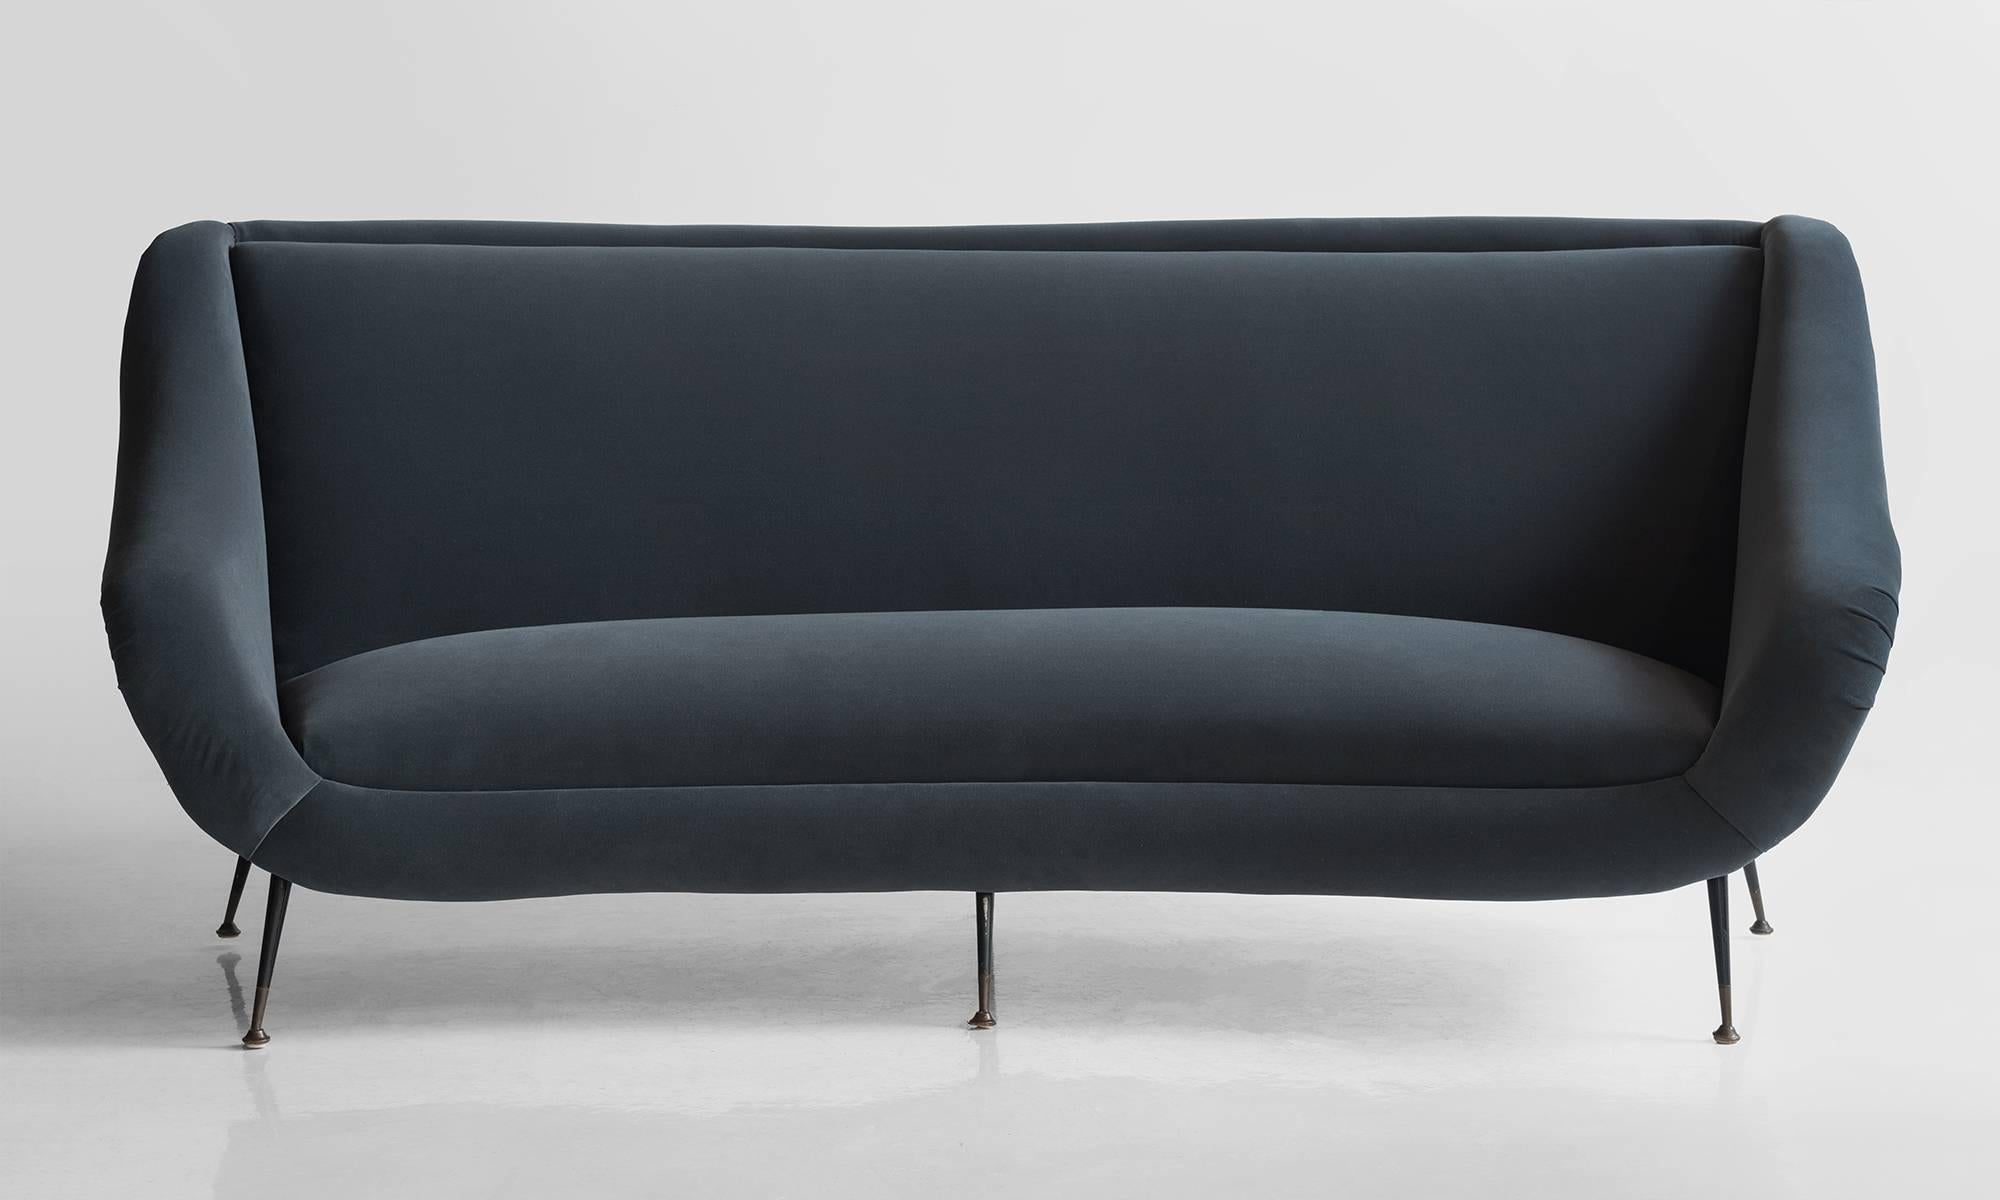 Curved form, newly reupholstered in Maharam fabric.